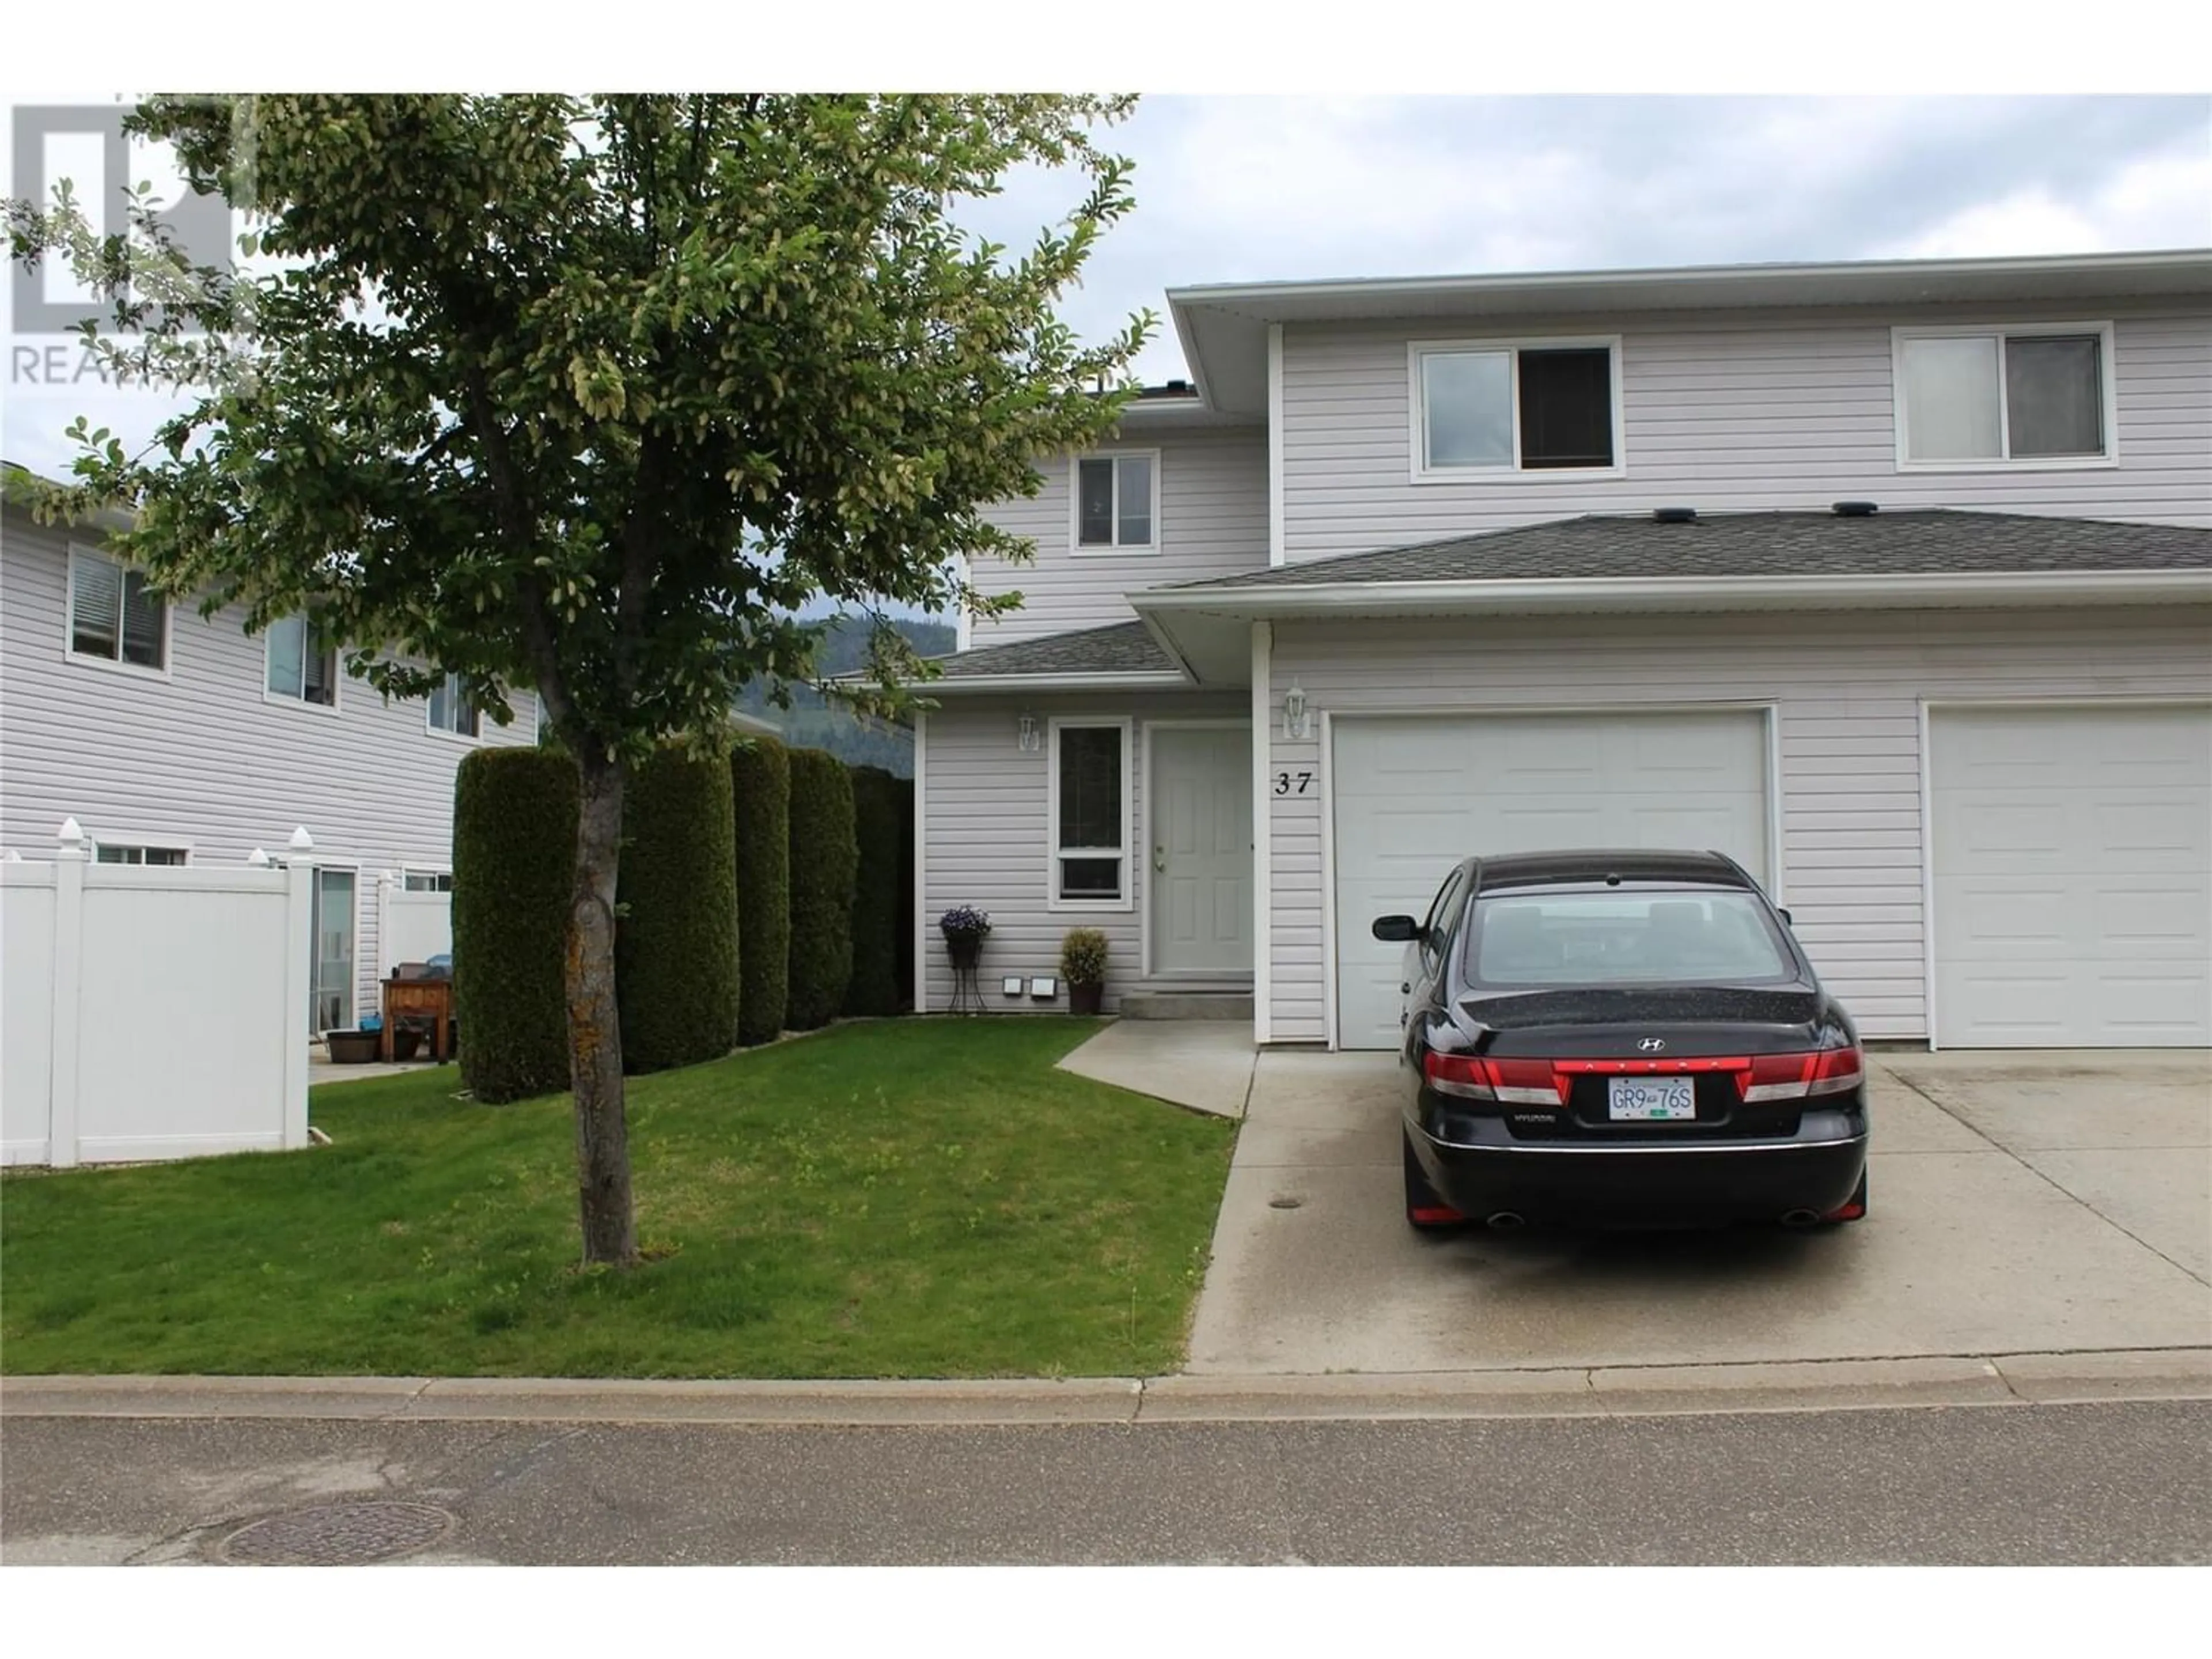 A pic from exterior of the house or condo for 2951 11 Avenue NE Unit# 37, Salmon Arm British Columbia V1E1V8